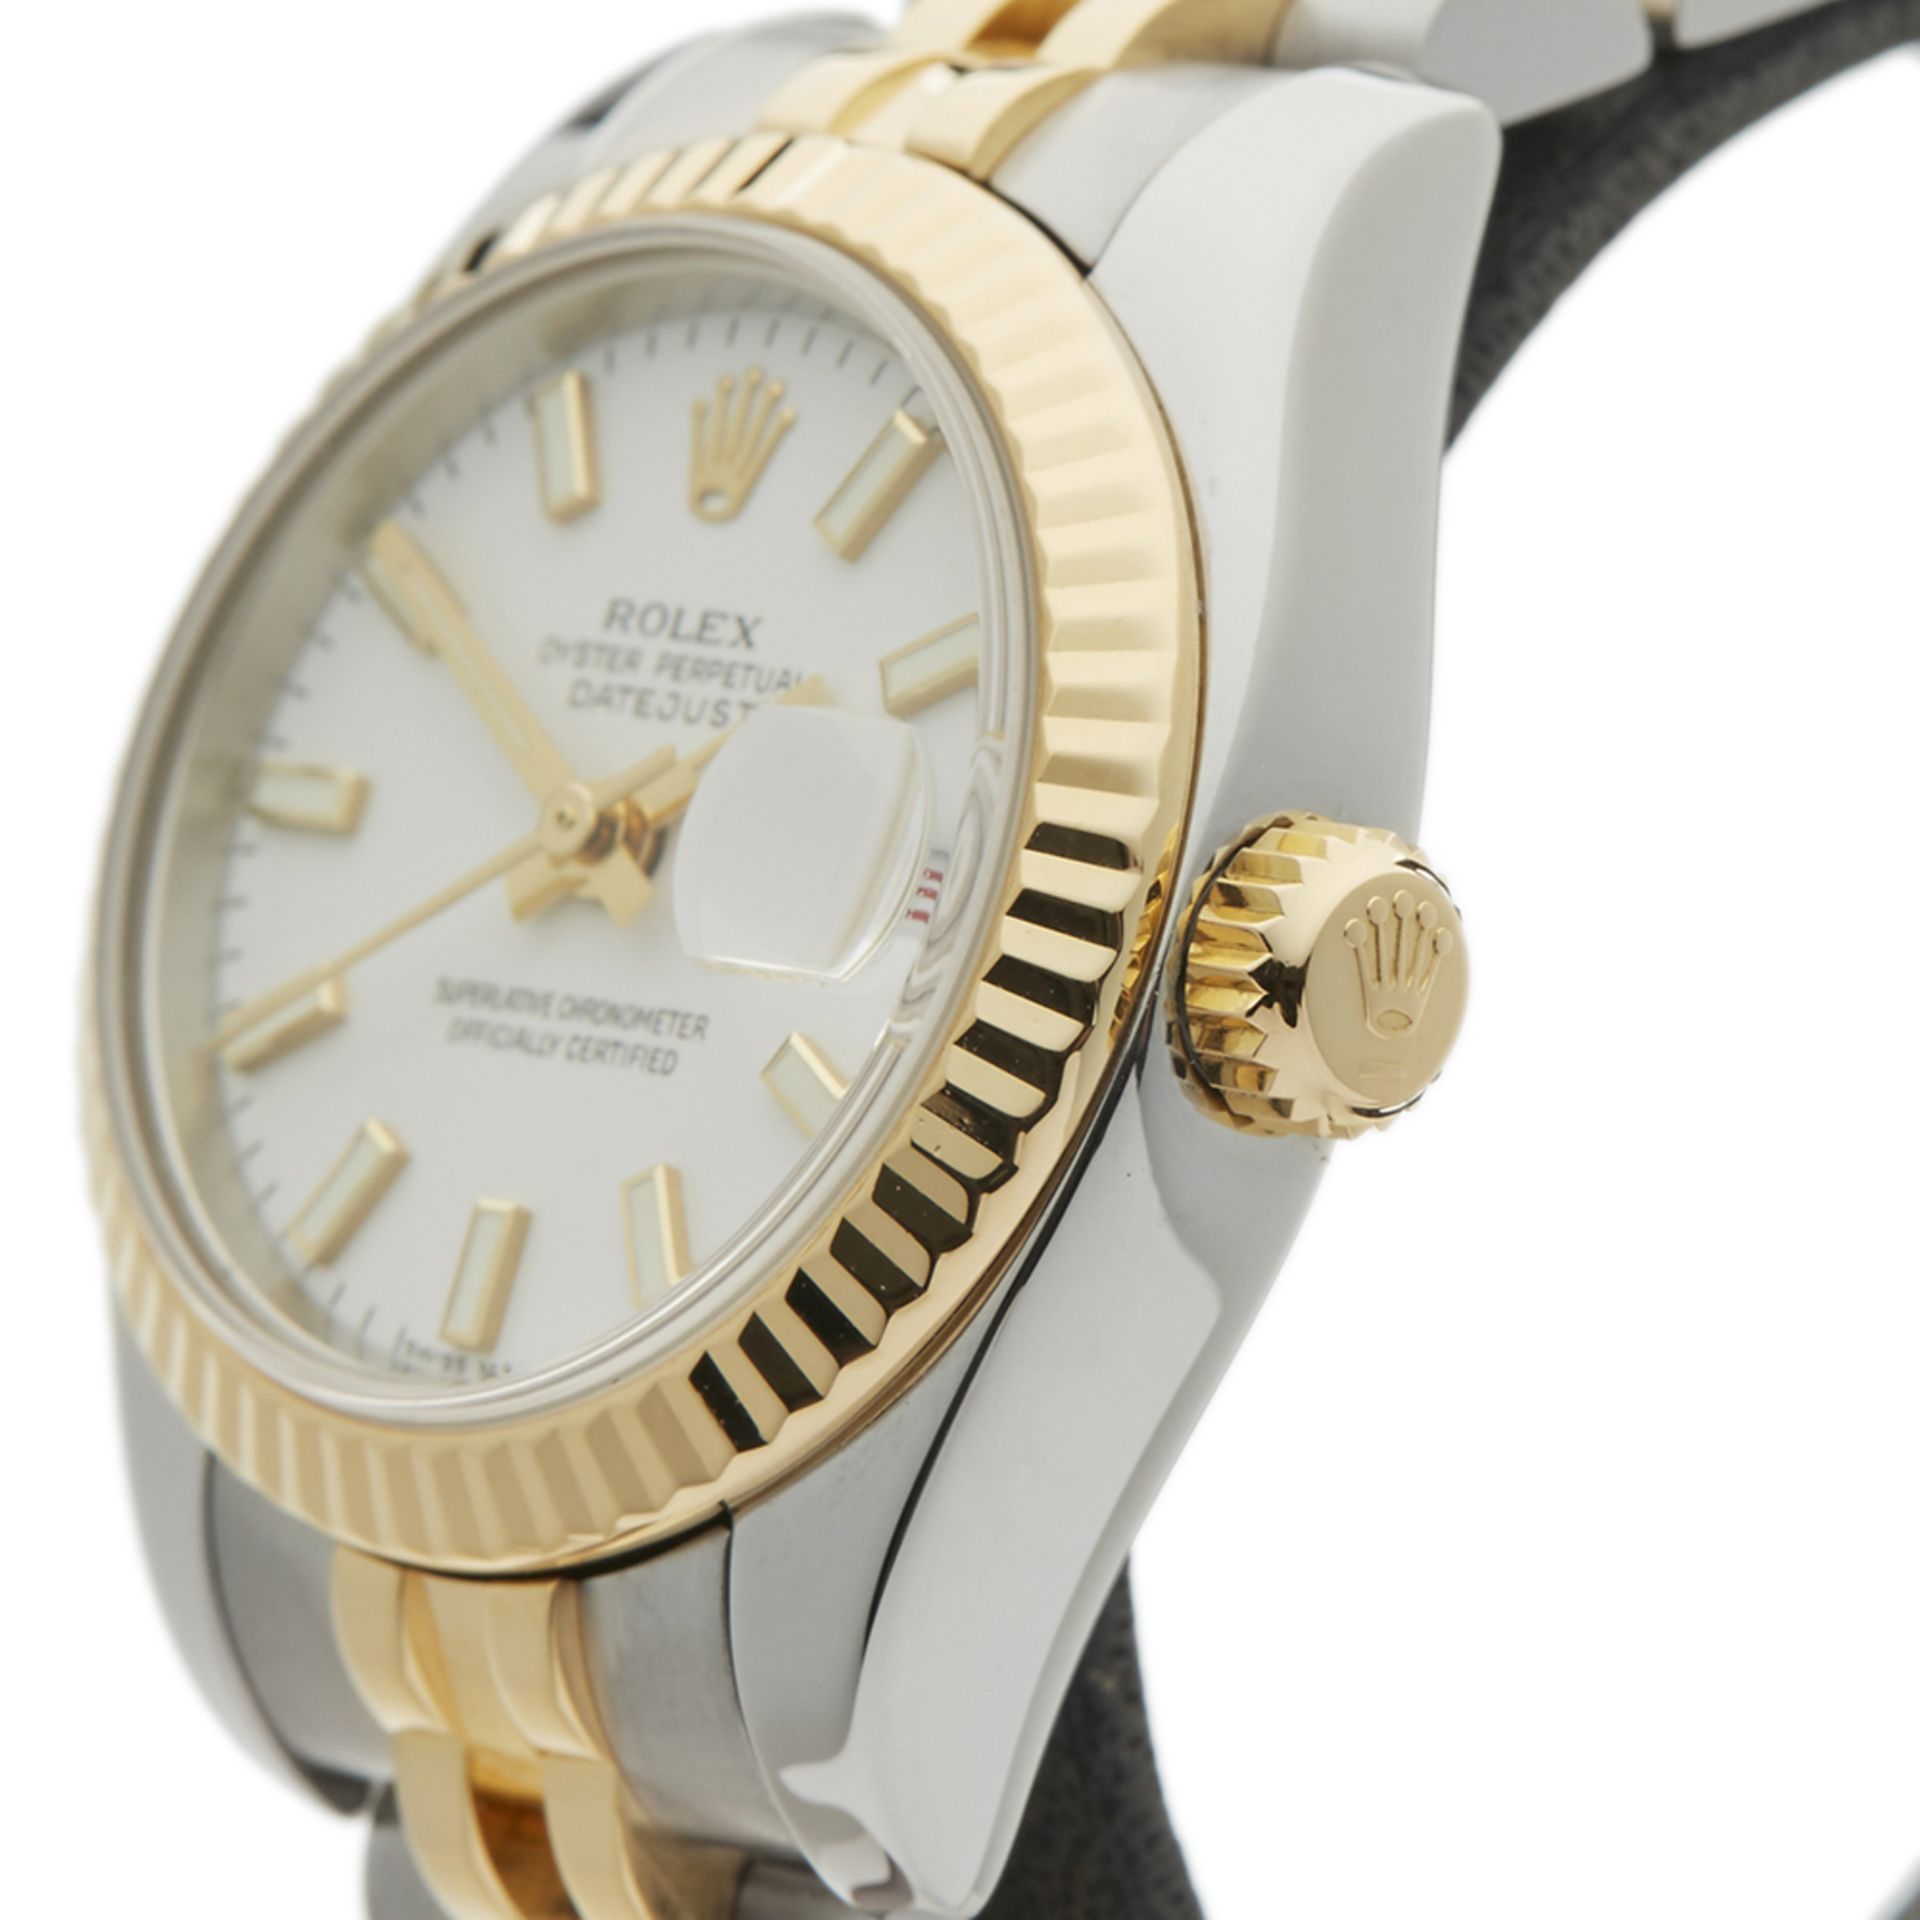 Datejust 26mm Stainless Steel & 18K Yellow Gold - 179173 - Image 4 of 9